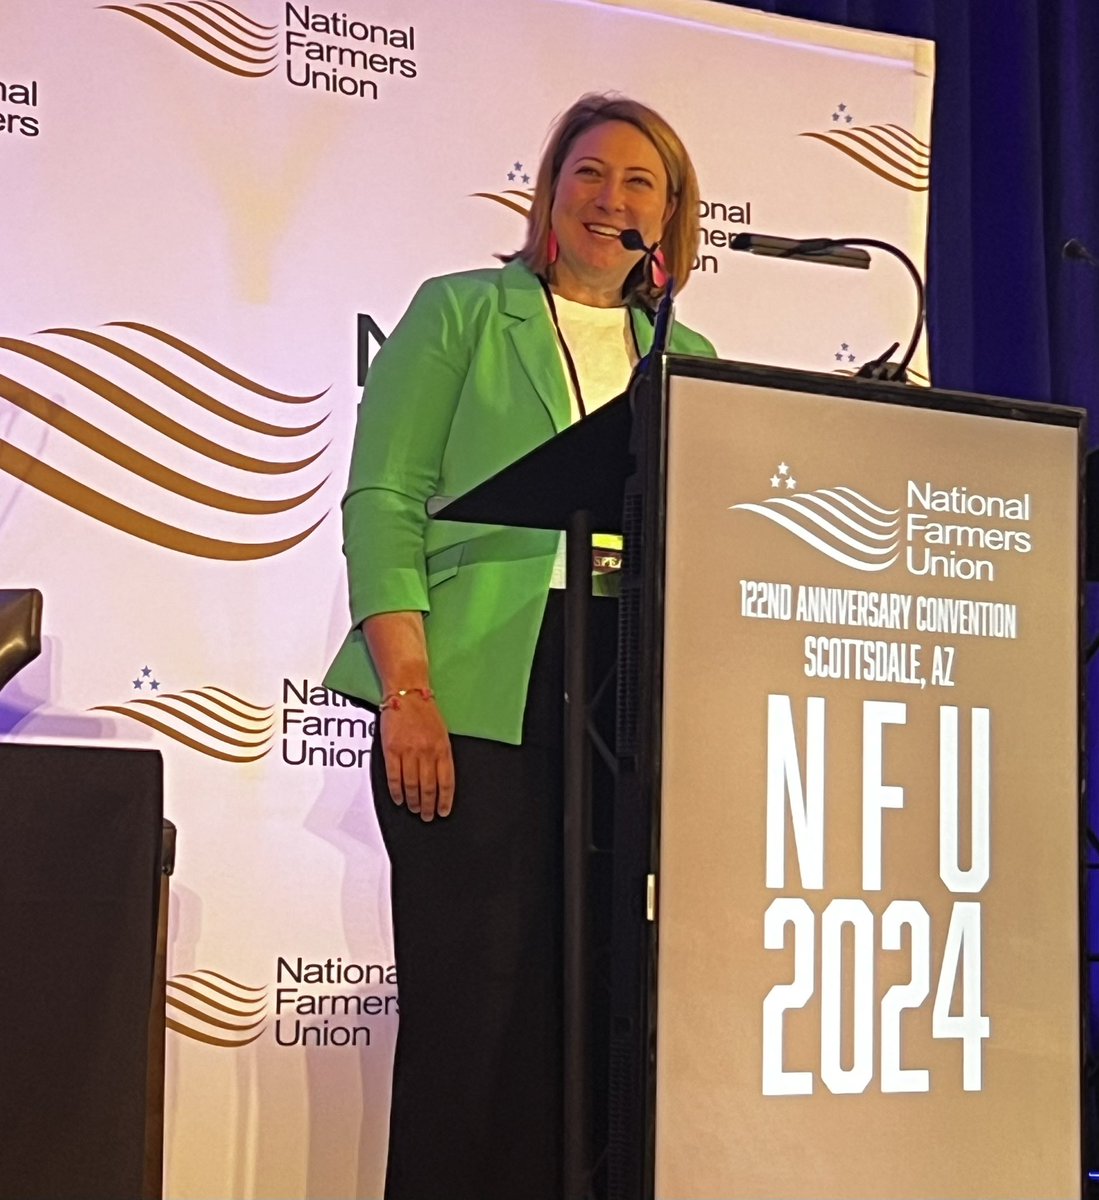 It was great to speak with @NFUDC on behalf of @NAFB this morning about relationships in agriculture and AM radio. It’s been a great week in Scottsdale!